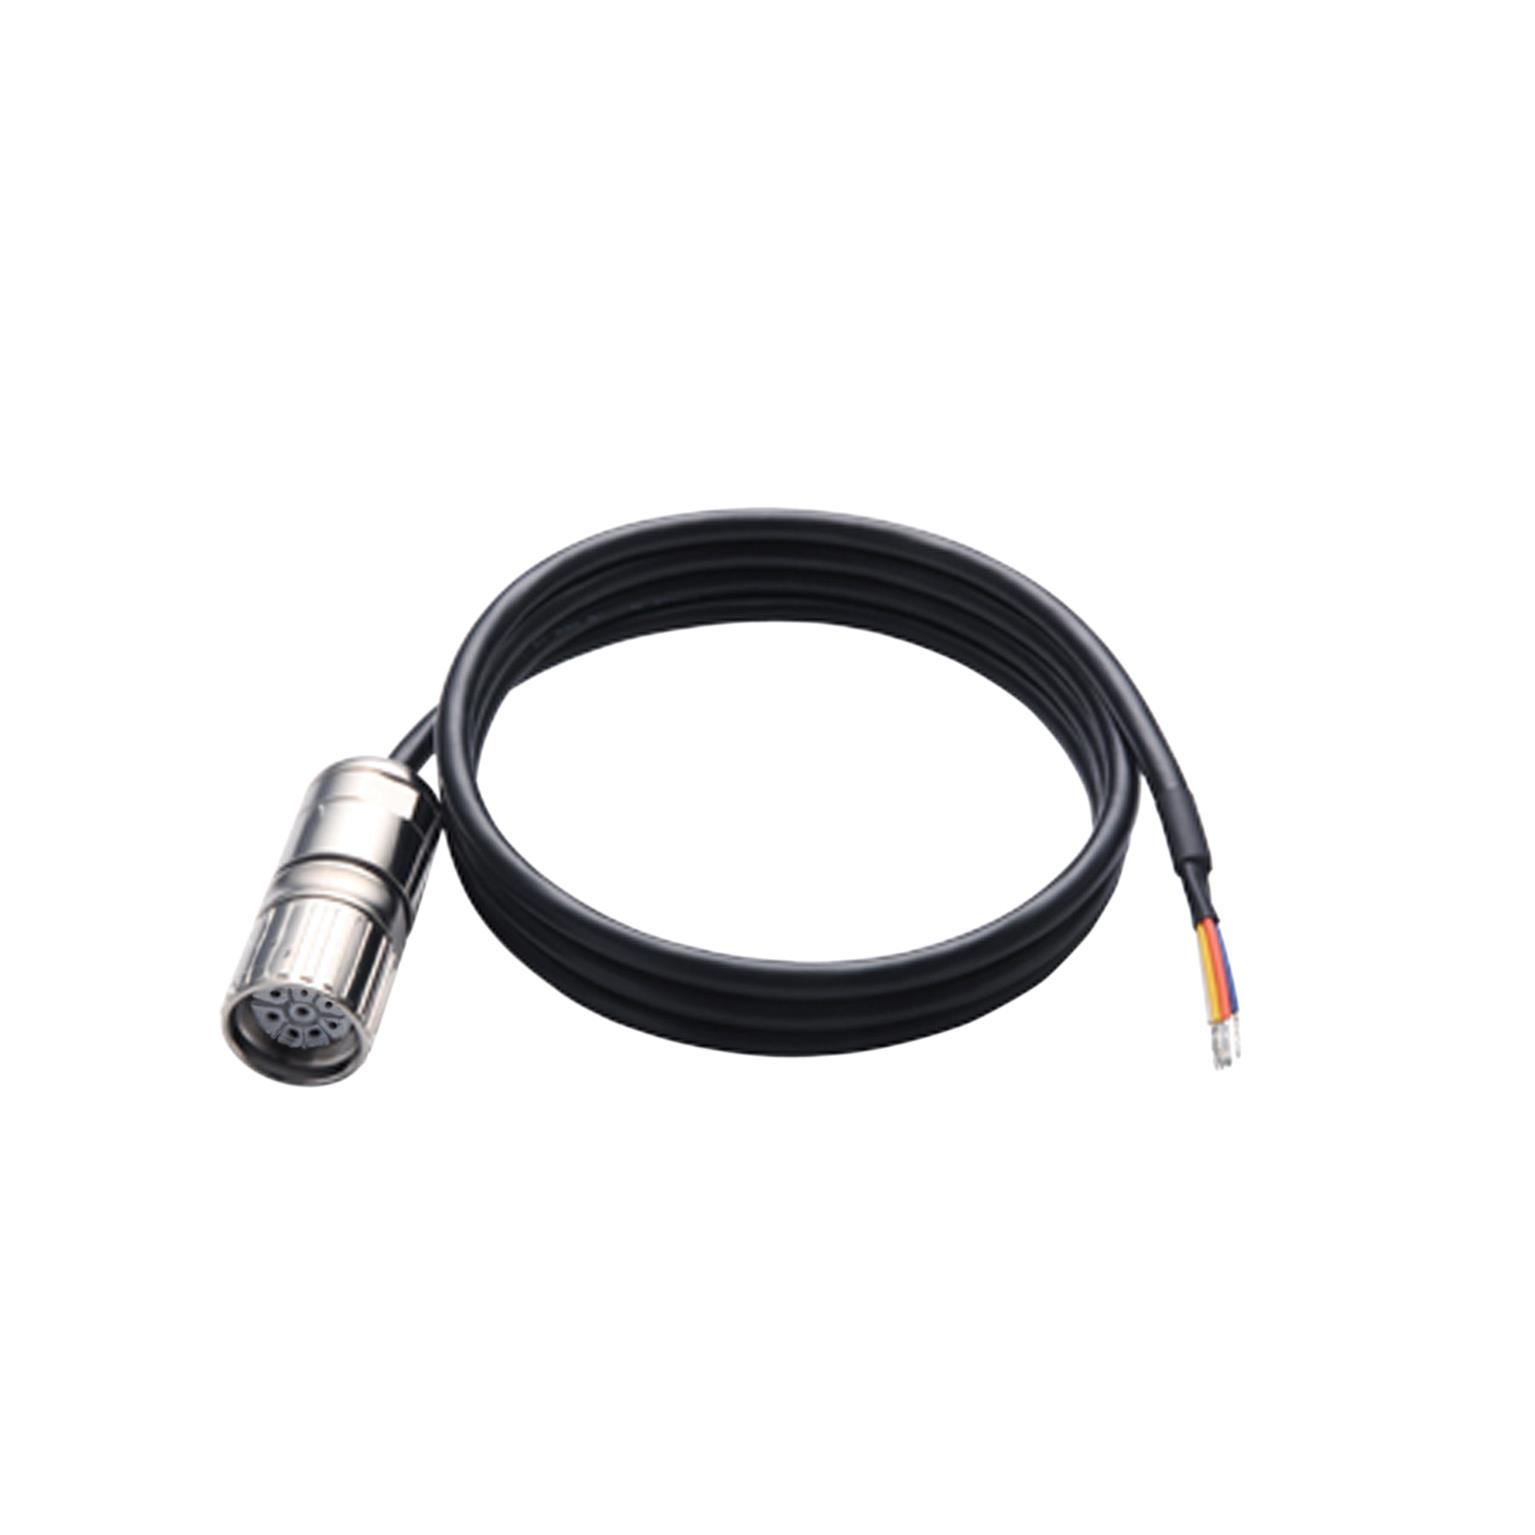 【VW3M5501R50】BMP POWER CABLE, 16 AWG, ONE END